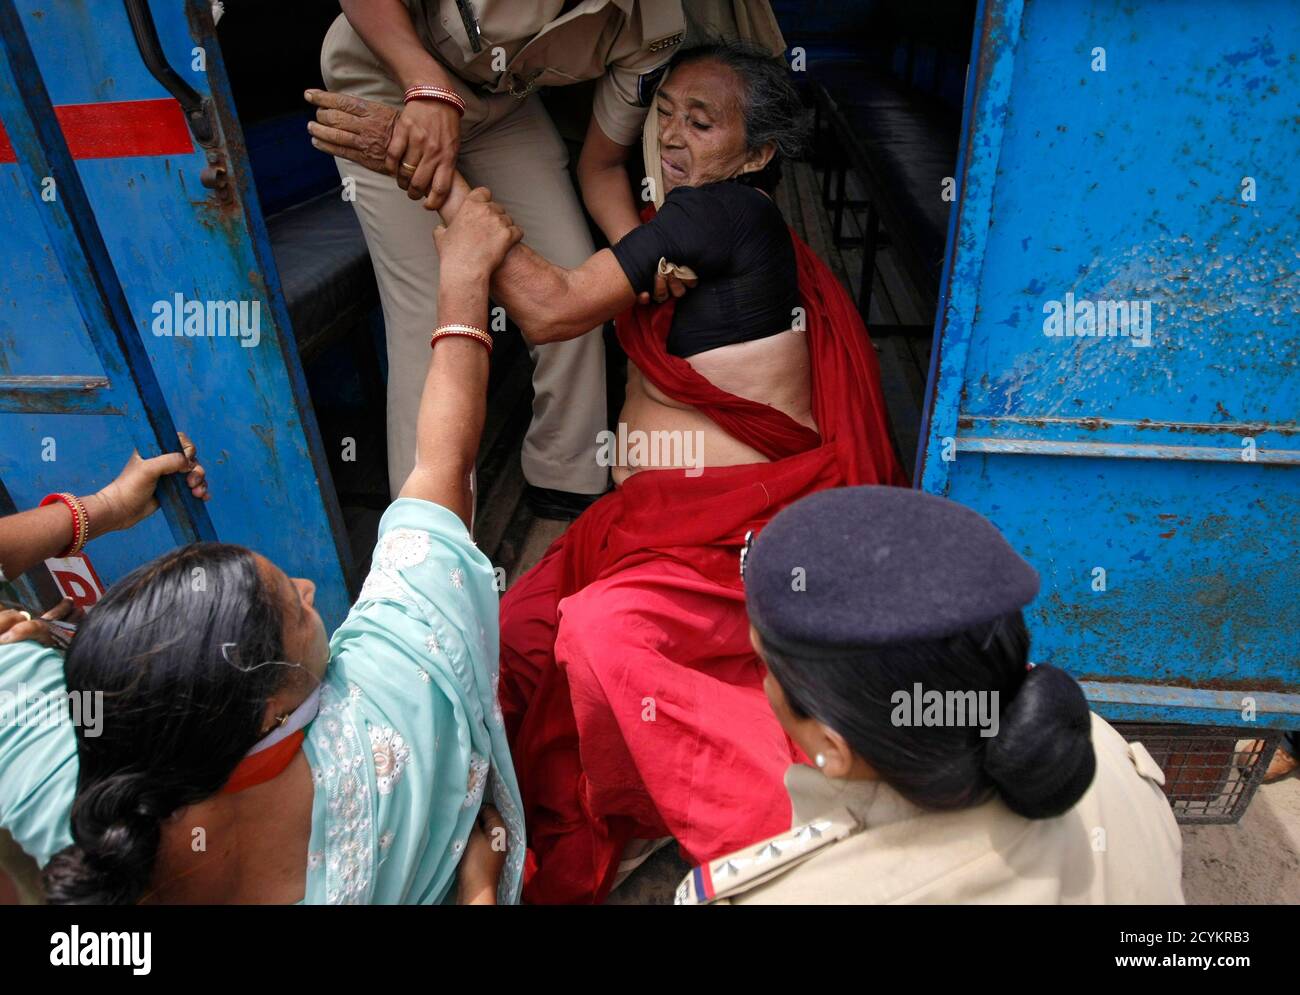 A demonstrator is detained by police during a protest at Gandhinagar in the western Indian state of Gujarat August 23, 2013. Hundreds of demonstrators on Friday attempted to reach the residence of Gujarat's chief minister Narendra Modi to demand basic amenities including water, roads, electricity for villagers, protesters said. REUTERS/Amit Dave (INDIA - Tags: CIVIL UNREST CRIME LAW) Stock Photo